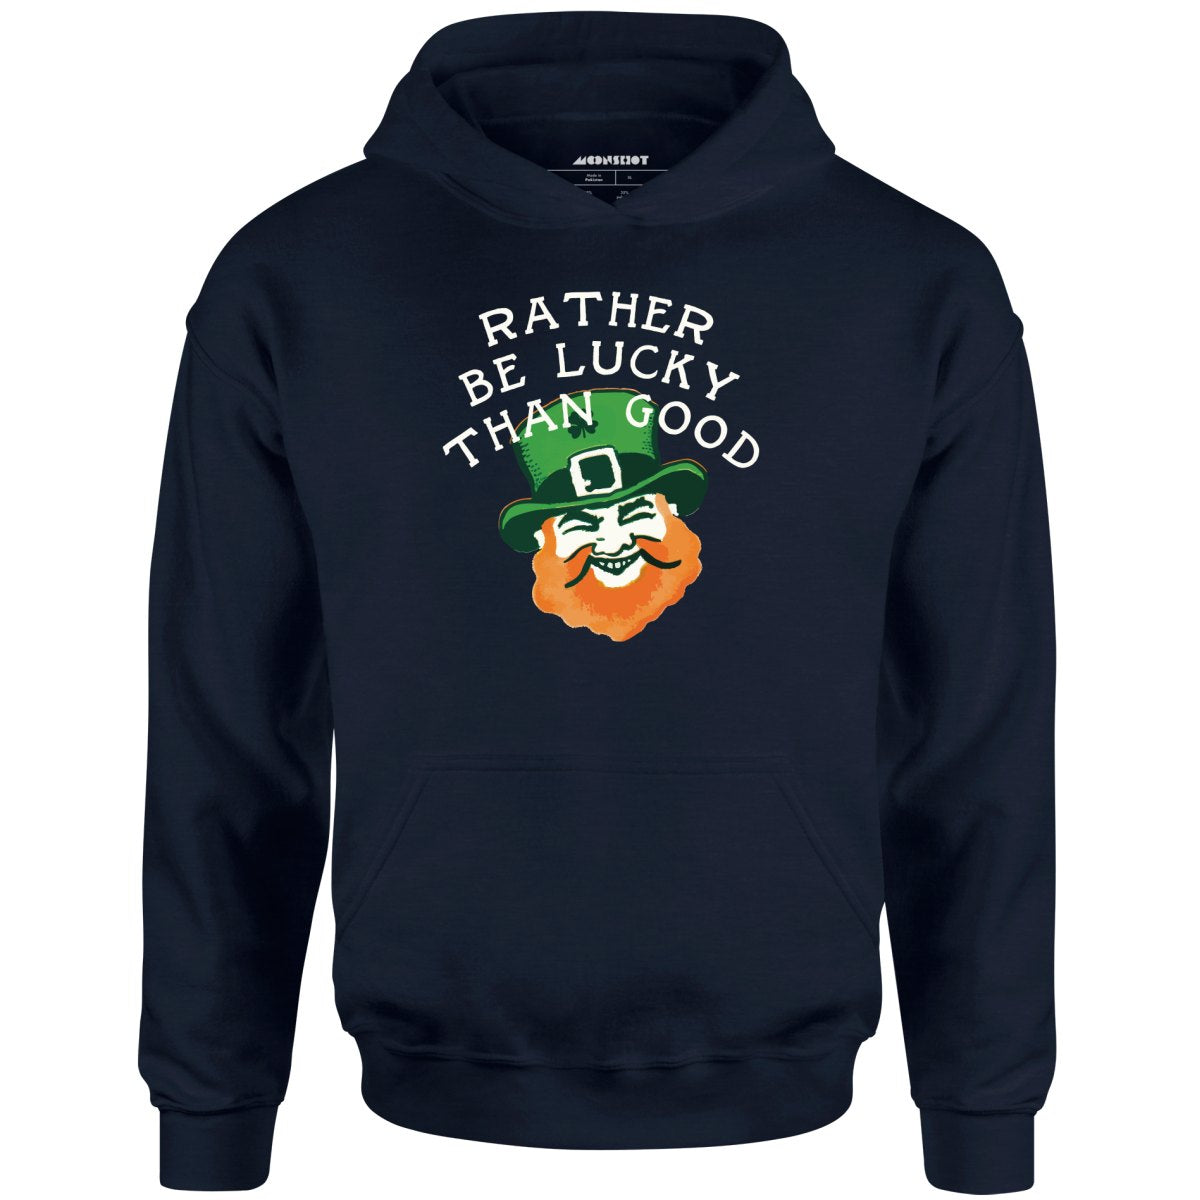 Rather Be Lucky Than Good - Unisex Hoodie